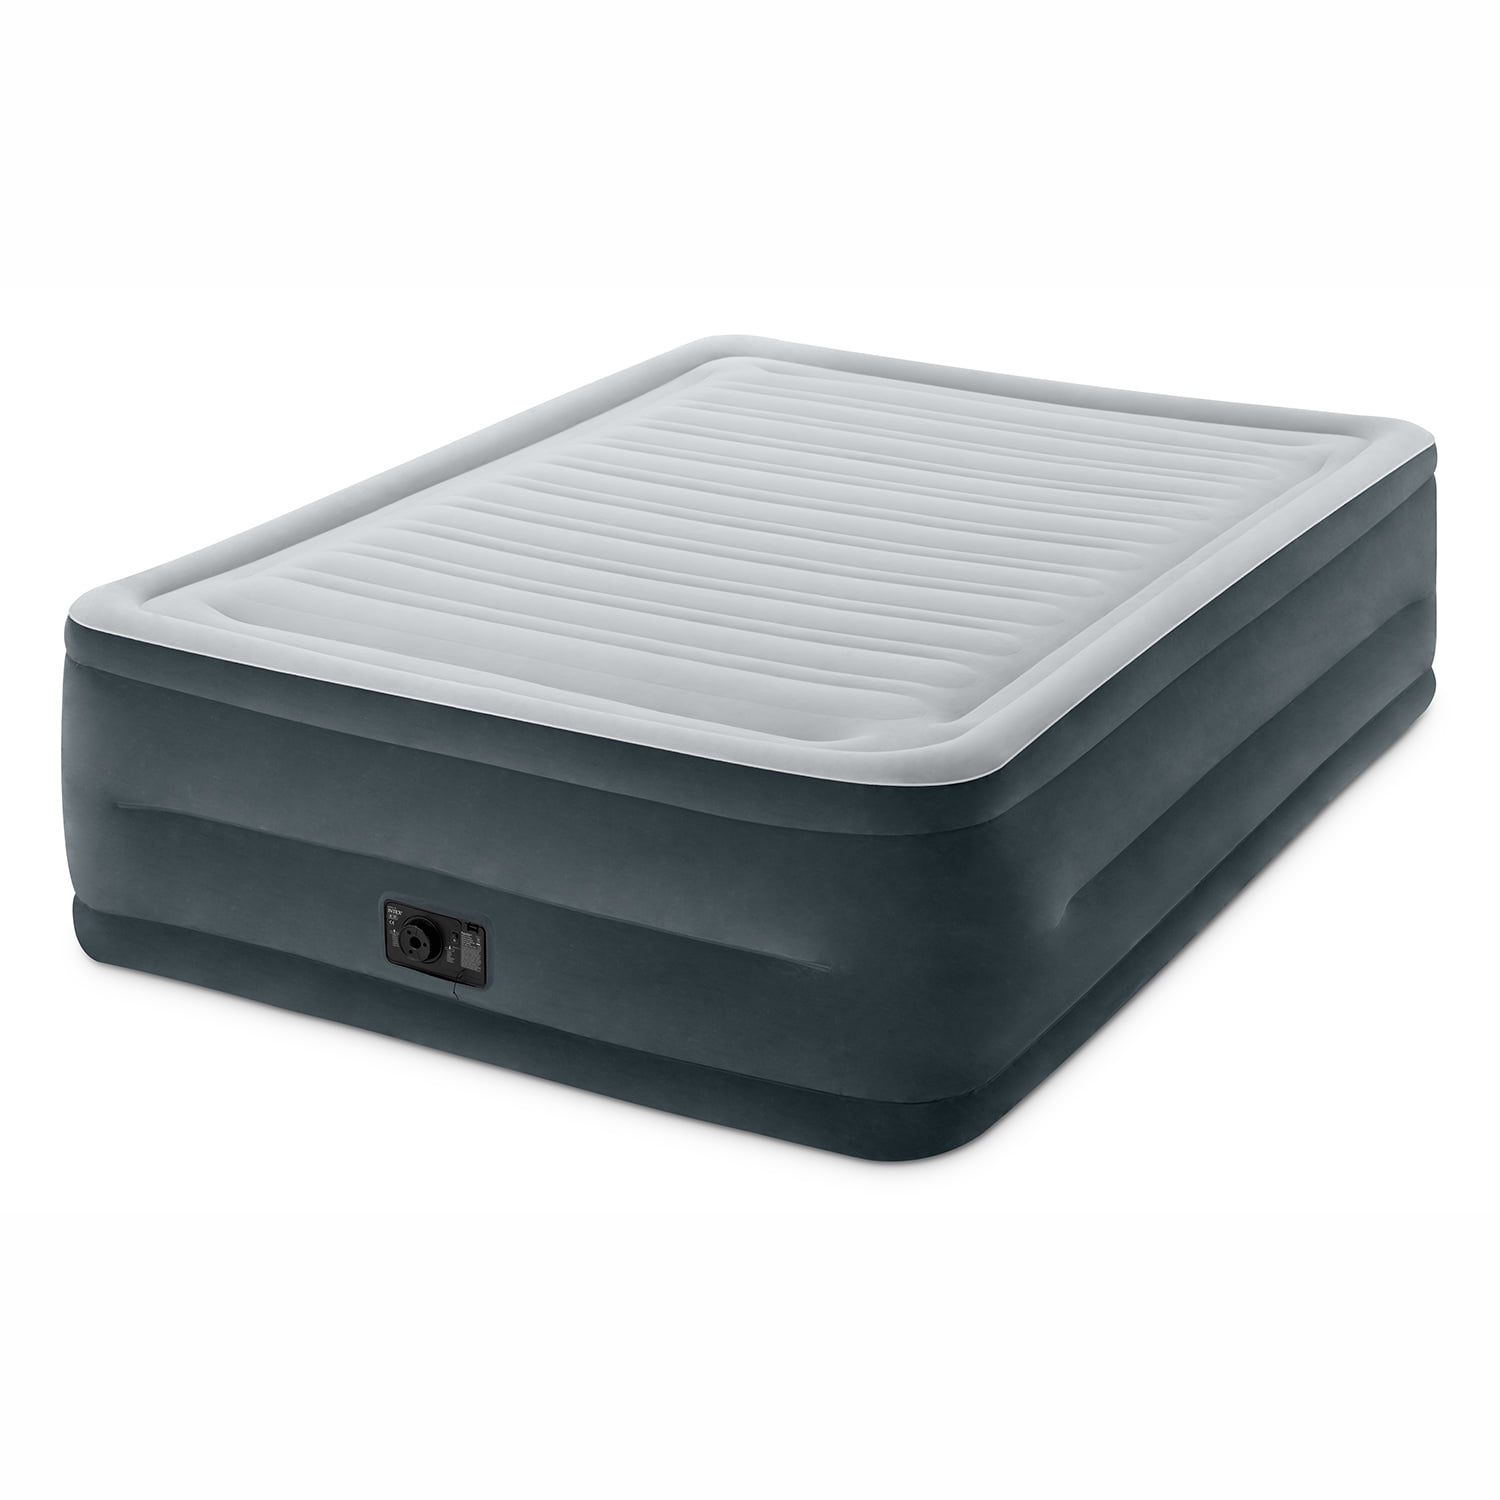 Polyester, 135 x 190 cm Quick & Easy to Inflate Vinyl Beige/Black Benross High Raised Airbed with Built in Pump Double 